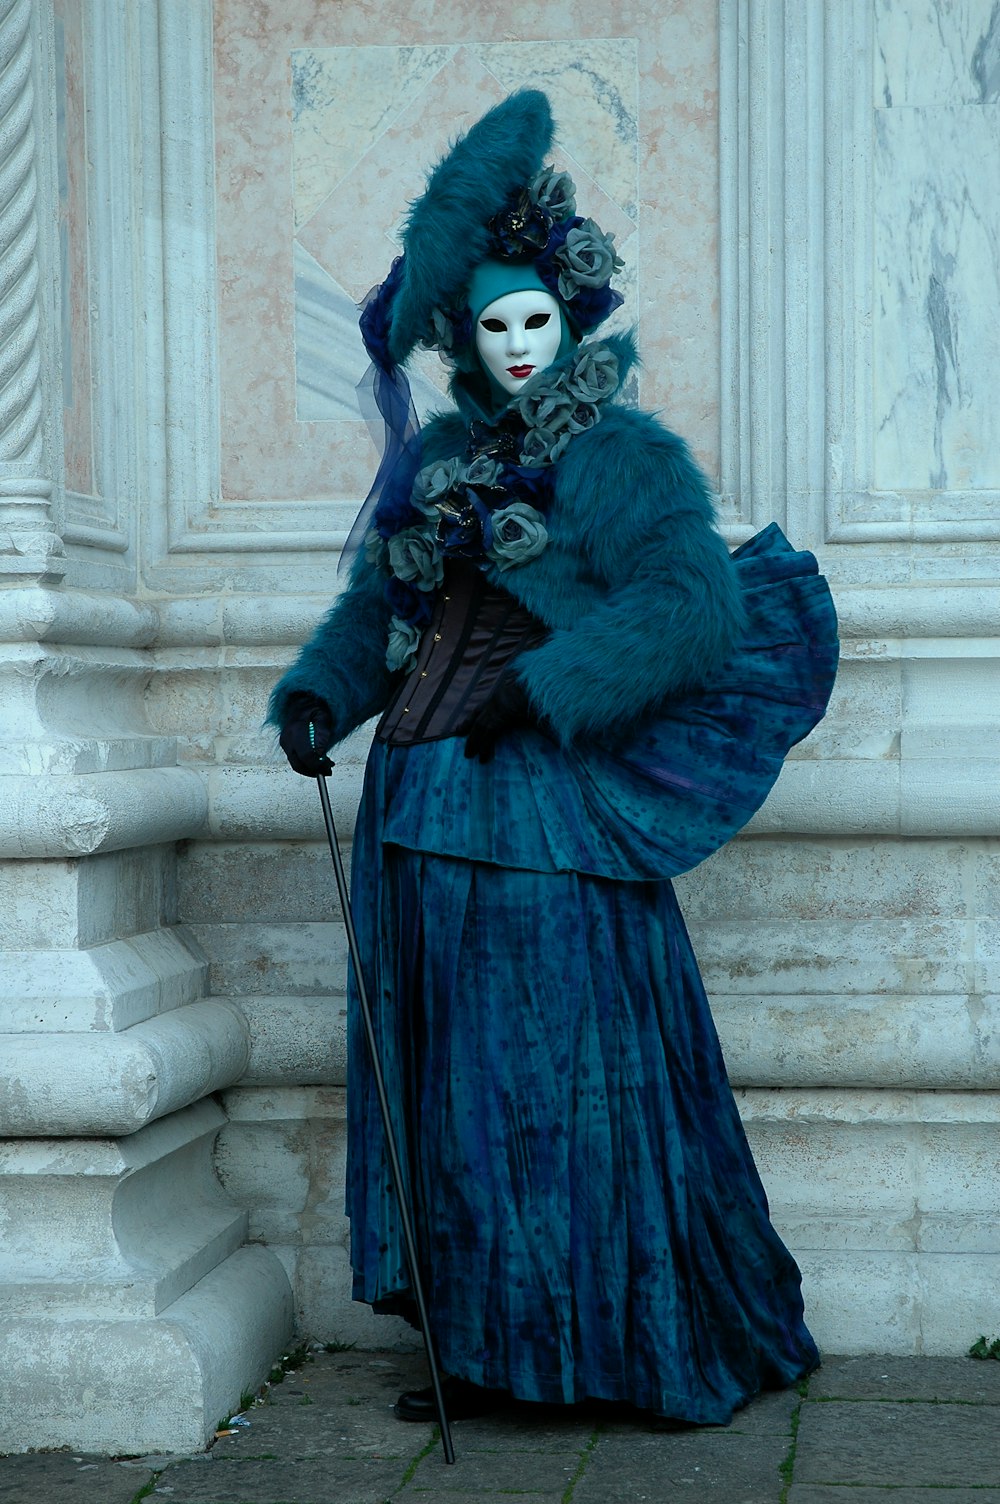 a woman in a blue dress with a mask and a cane